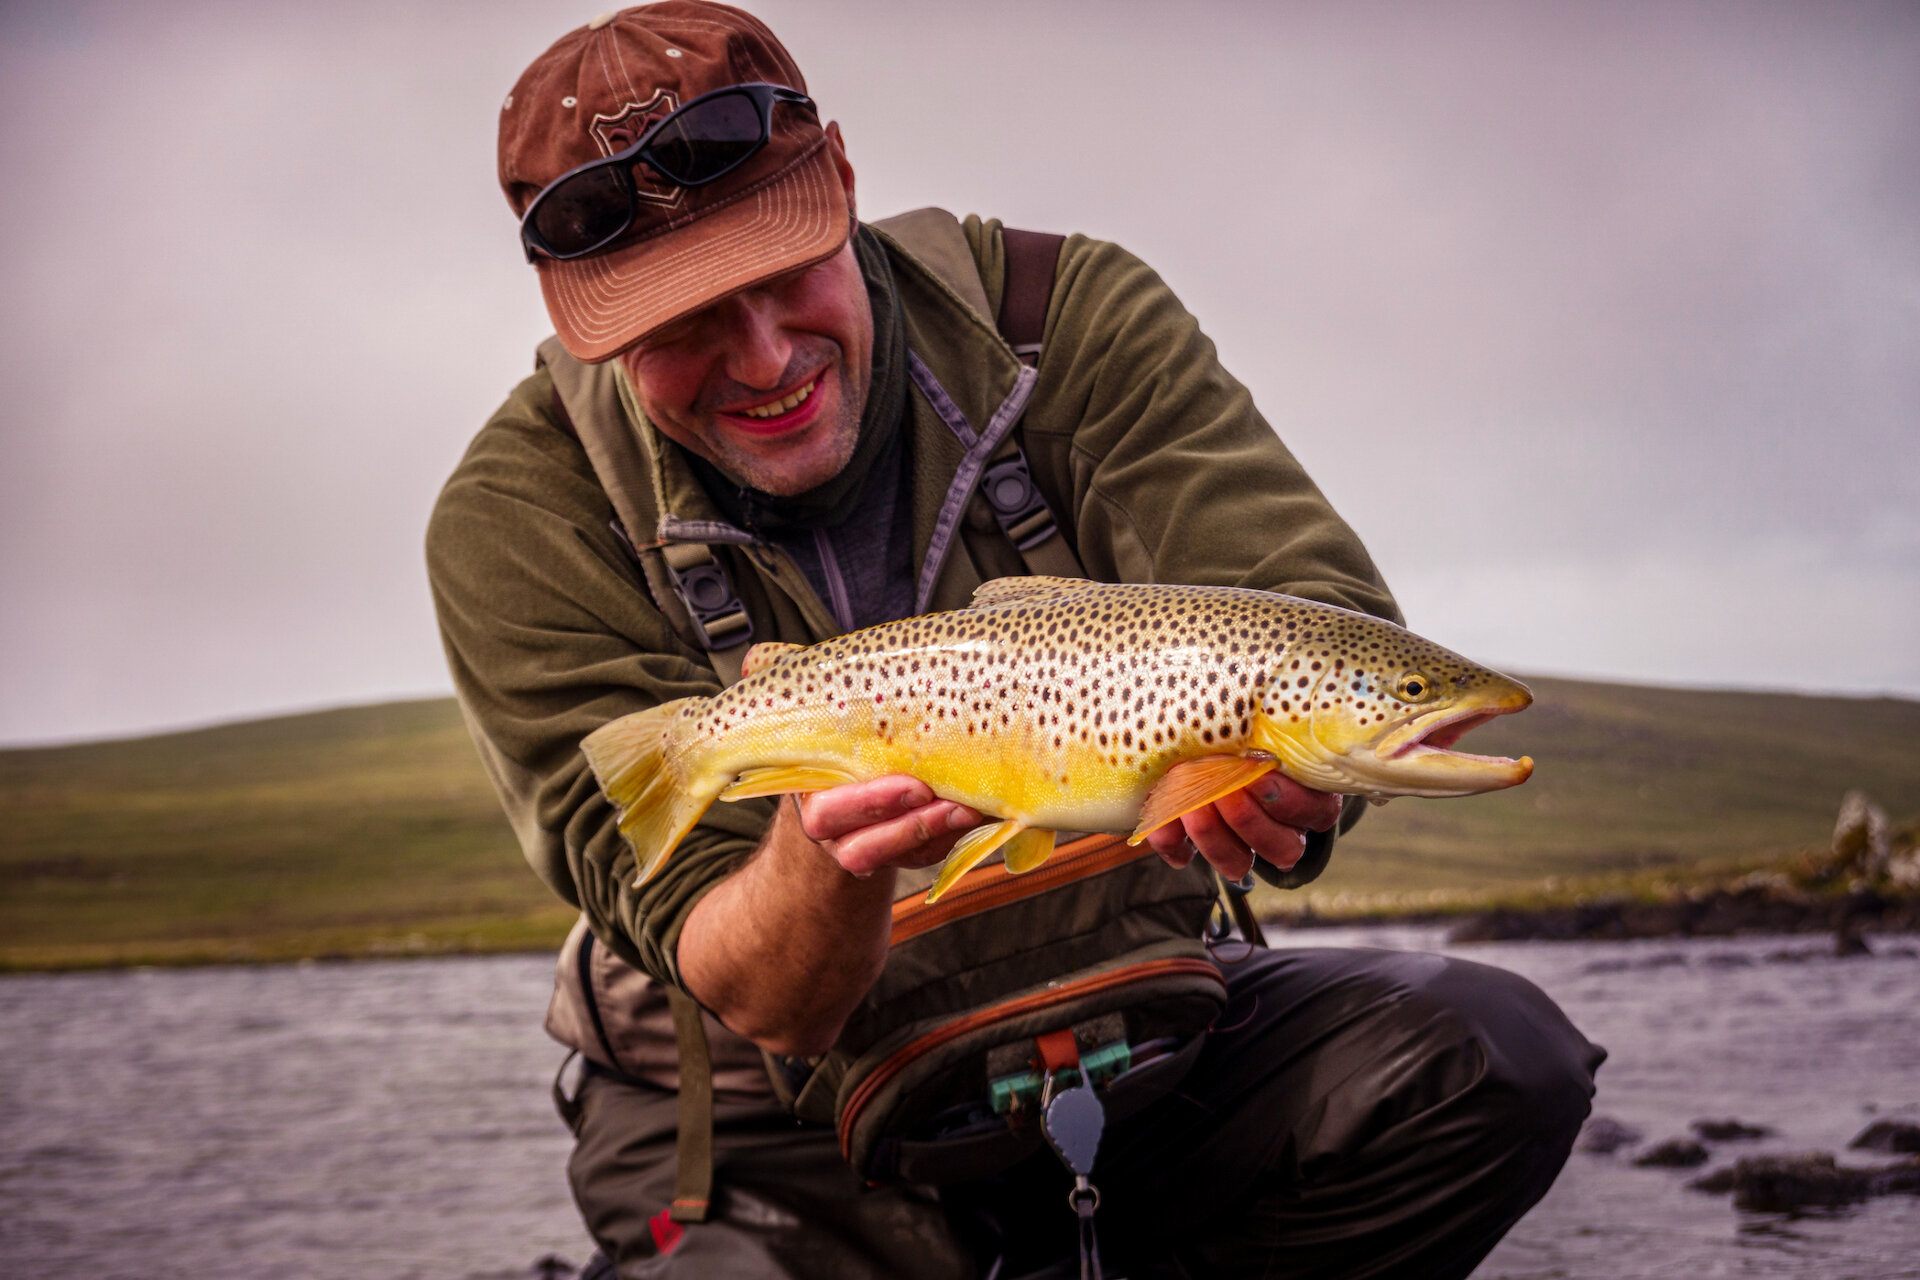 Many of Shetland's lochs are teeming with beautiful fish.